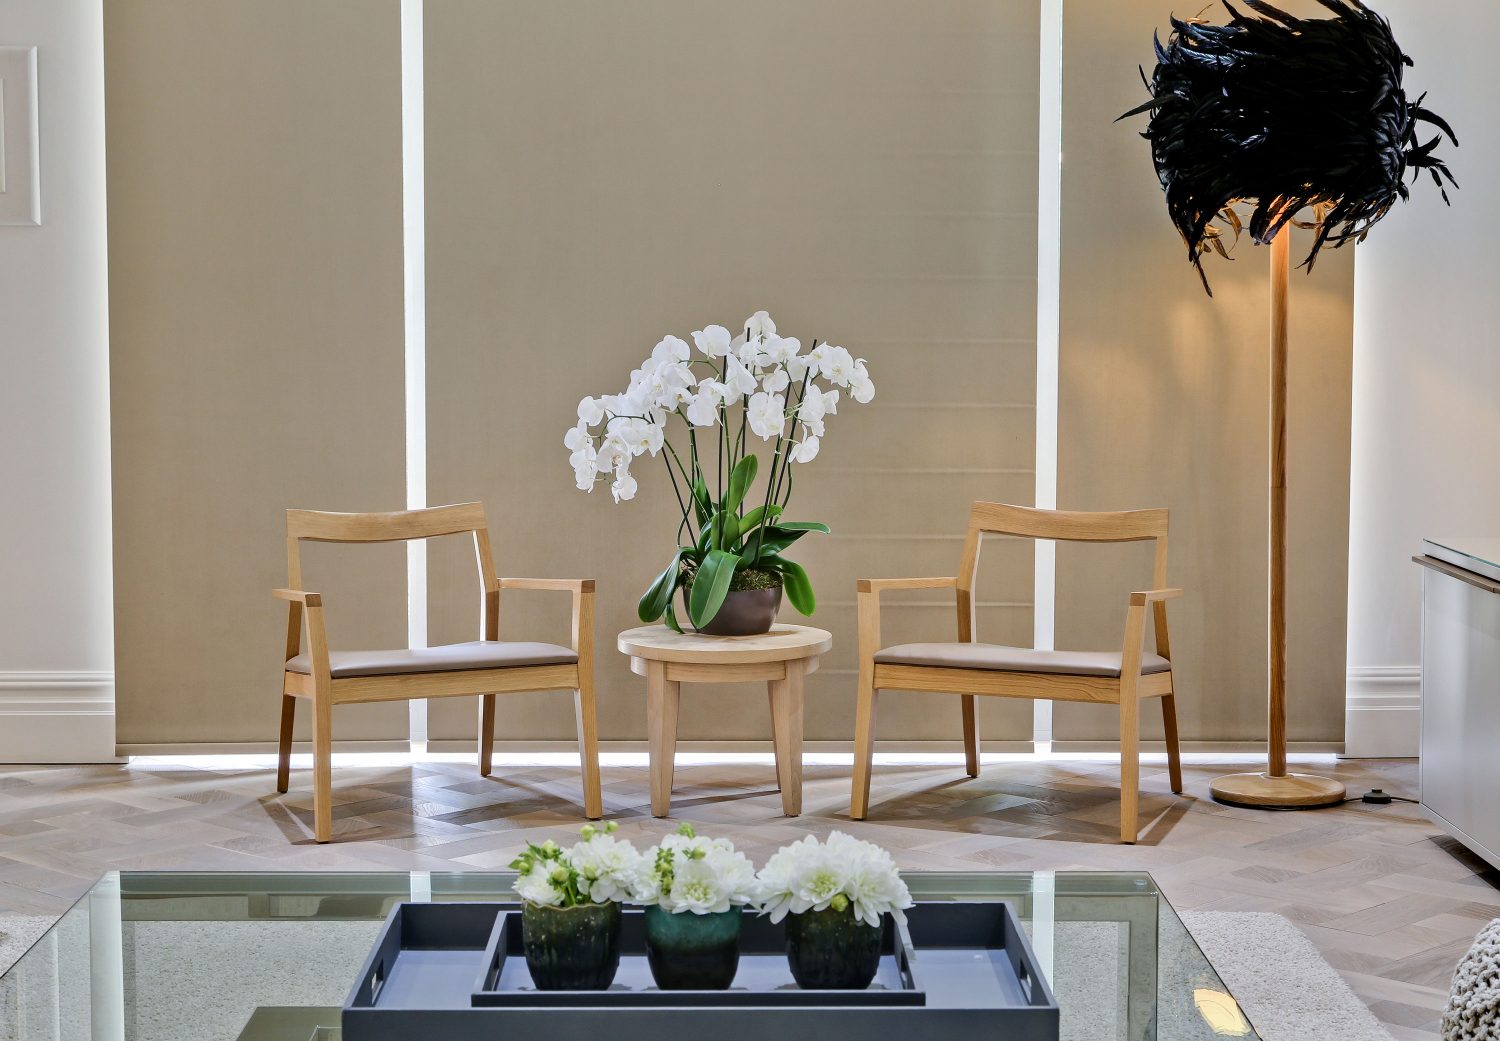 Style and Substance by Daniel Hopwood – Marc Krusin chairs. Posh interiors, Barnes